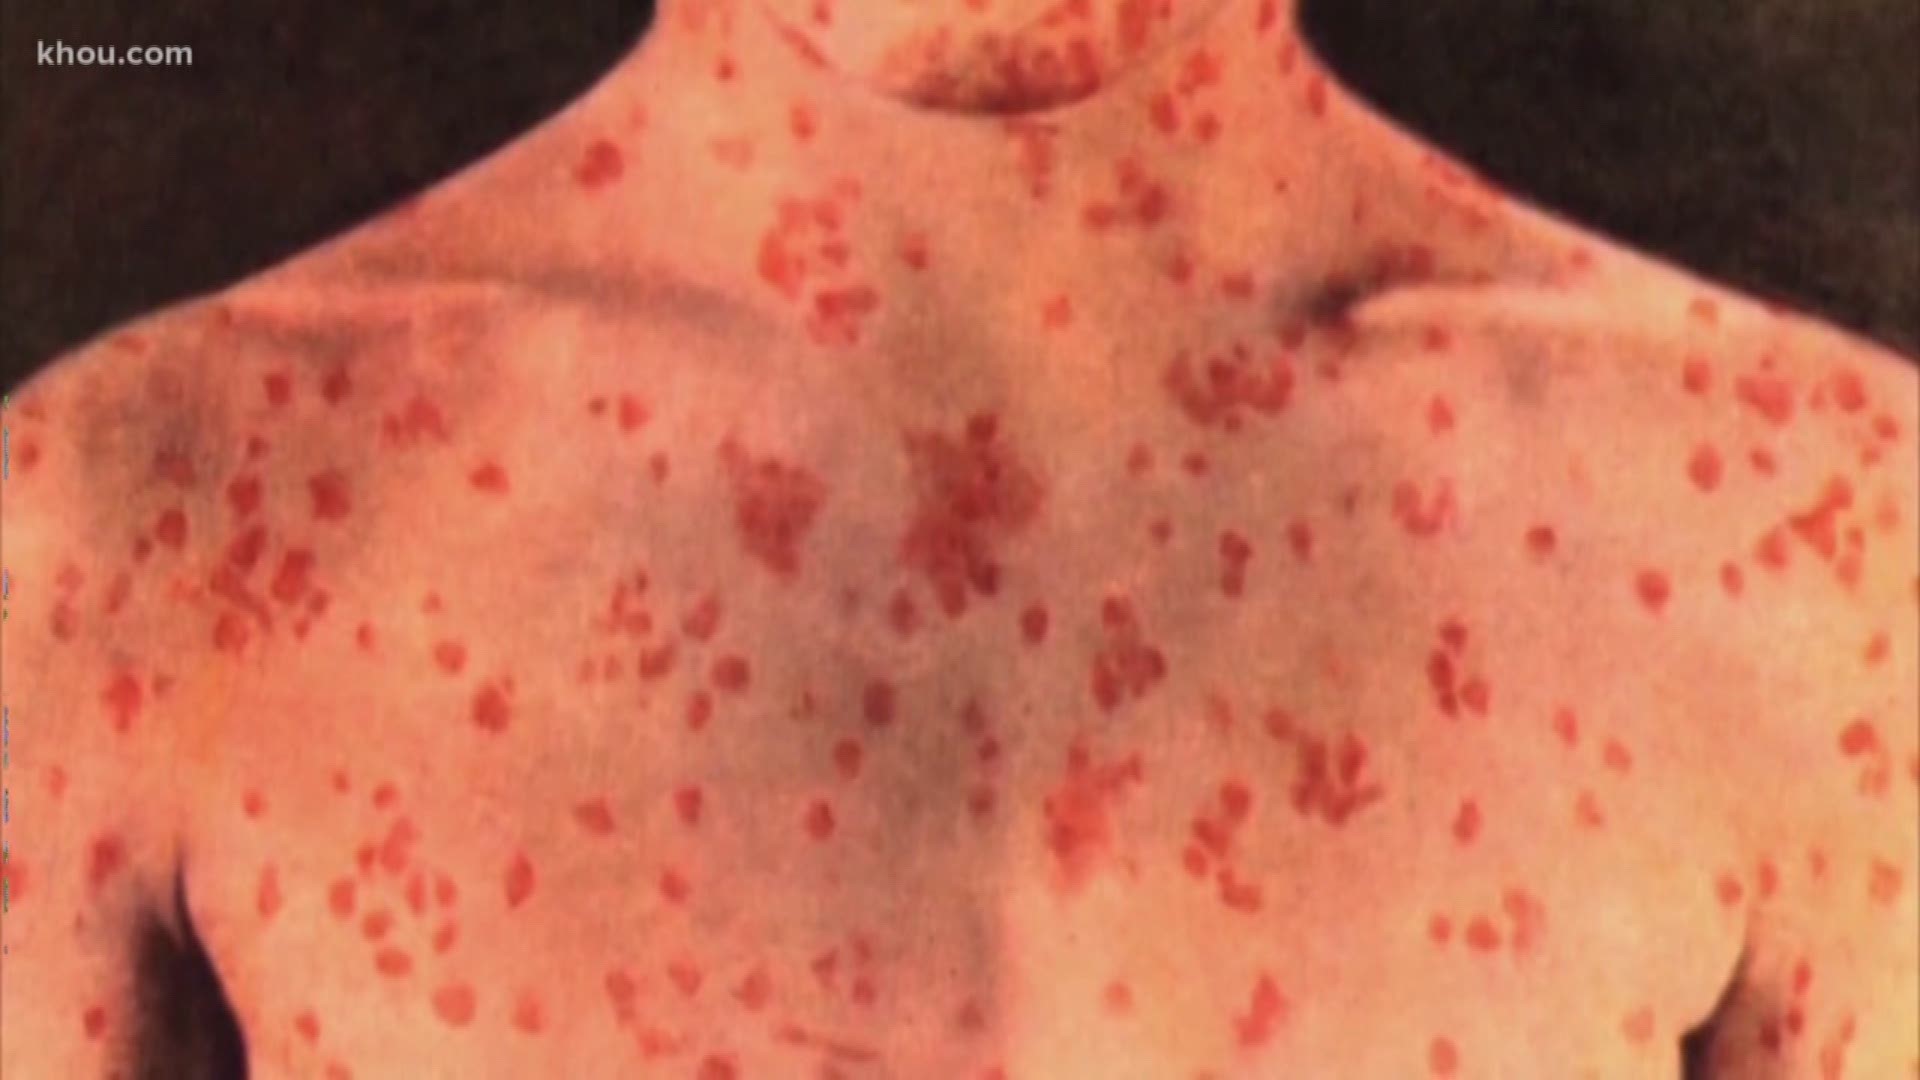 Health officials say the one measles case in Galveston County might be connected to the cases in Harris County.